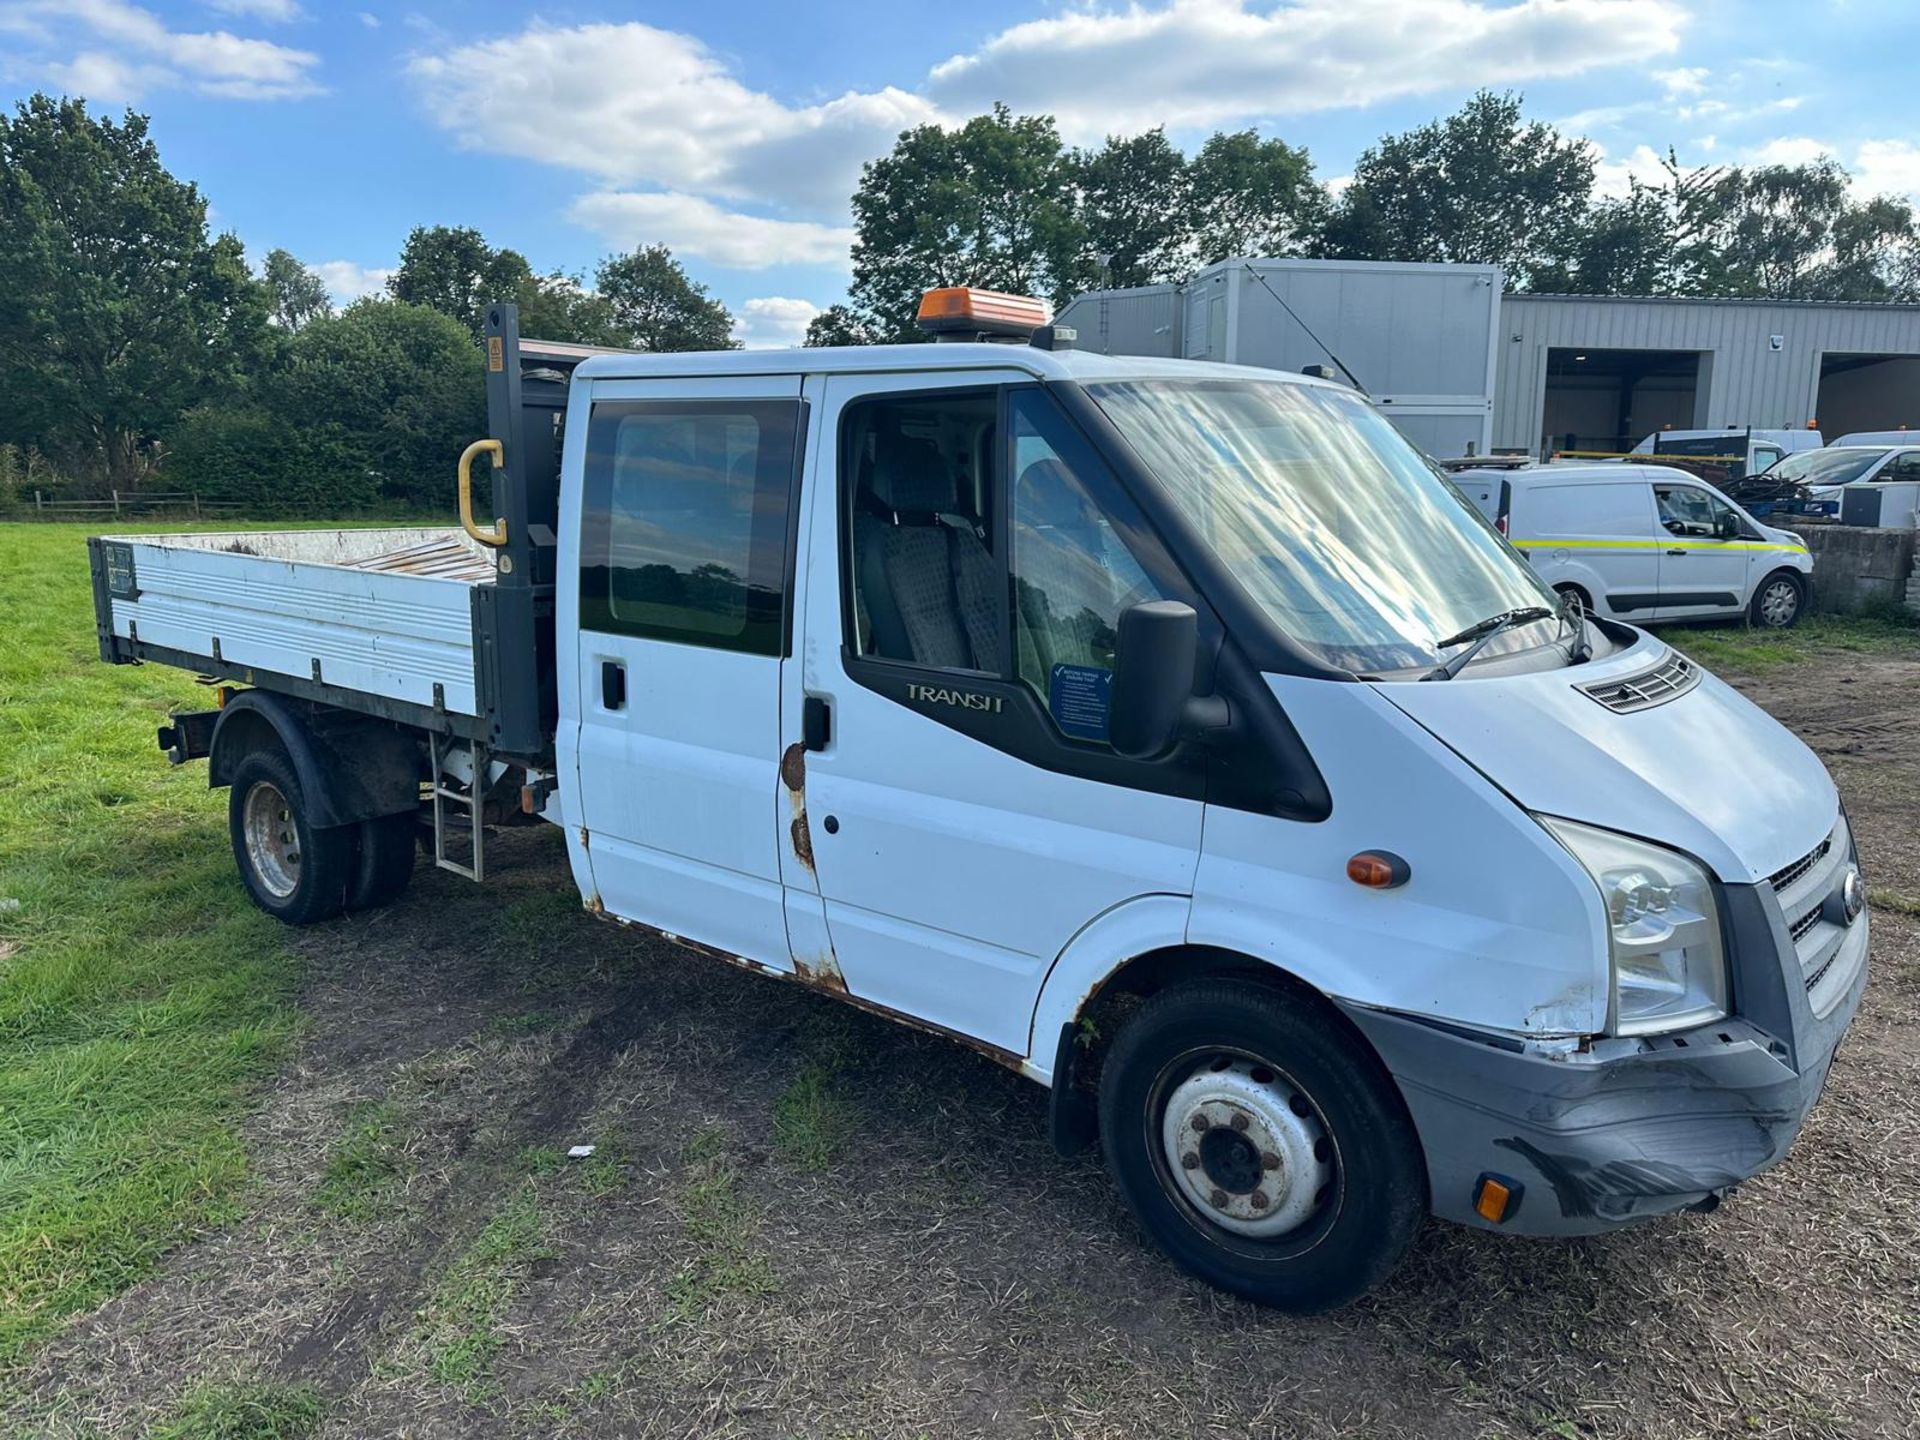 2009 59 FORD TRANSIT CREW CAB TIPPER - STARTS AND RUNS BUT DOESN’T DRIVE - REAR AXLE FAULTY